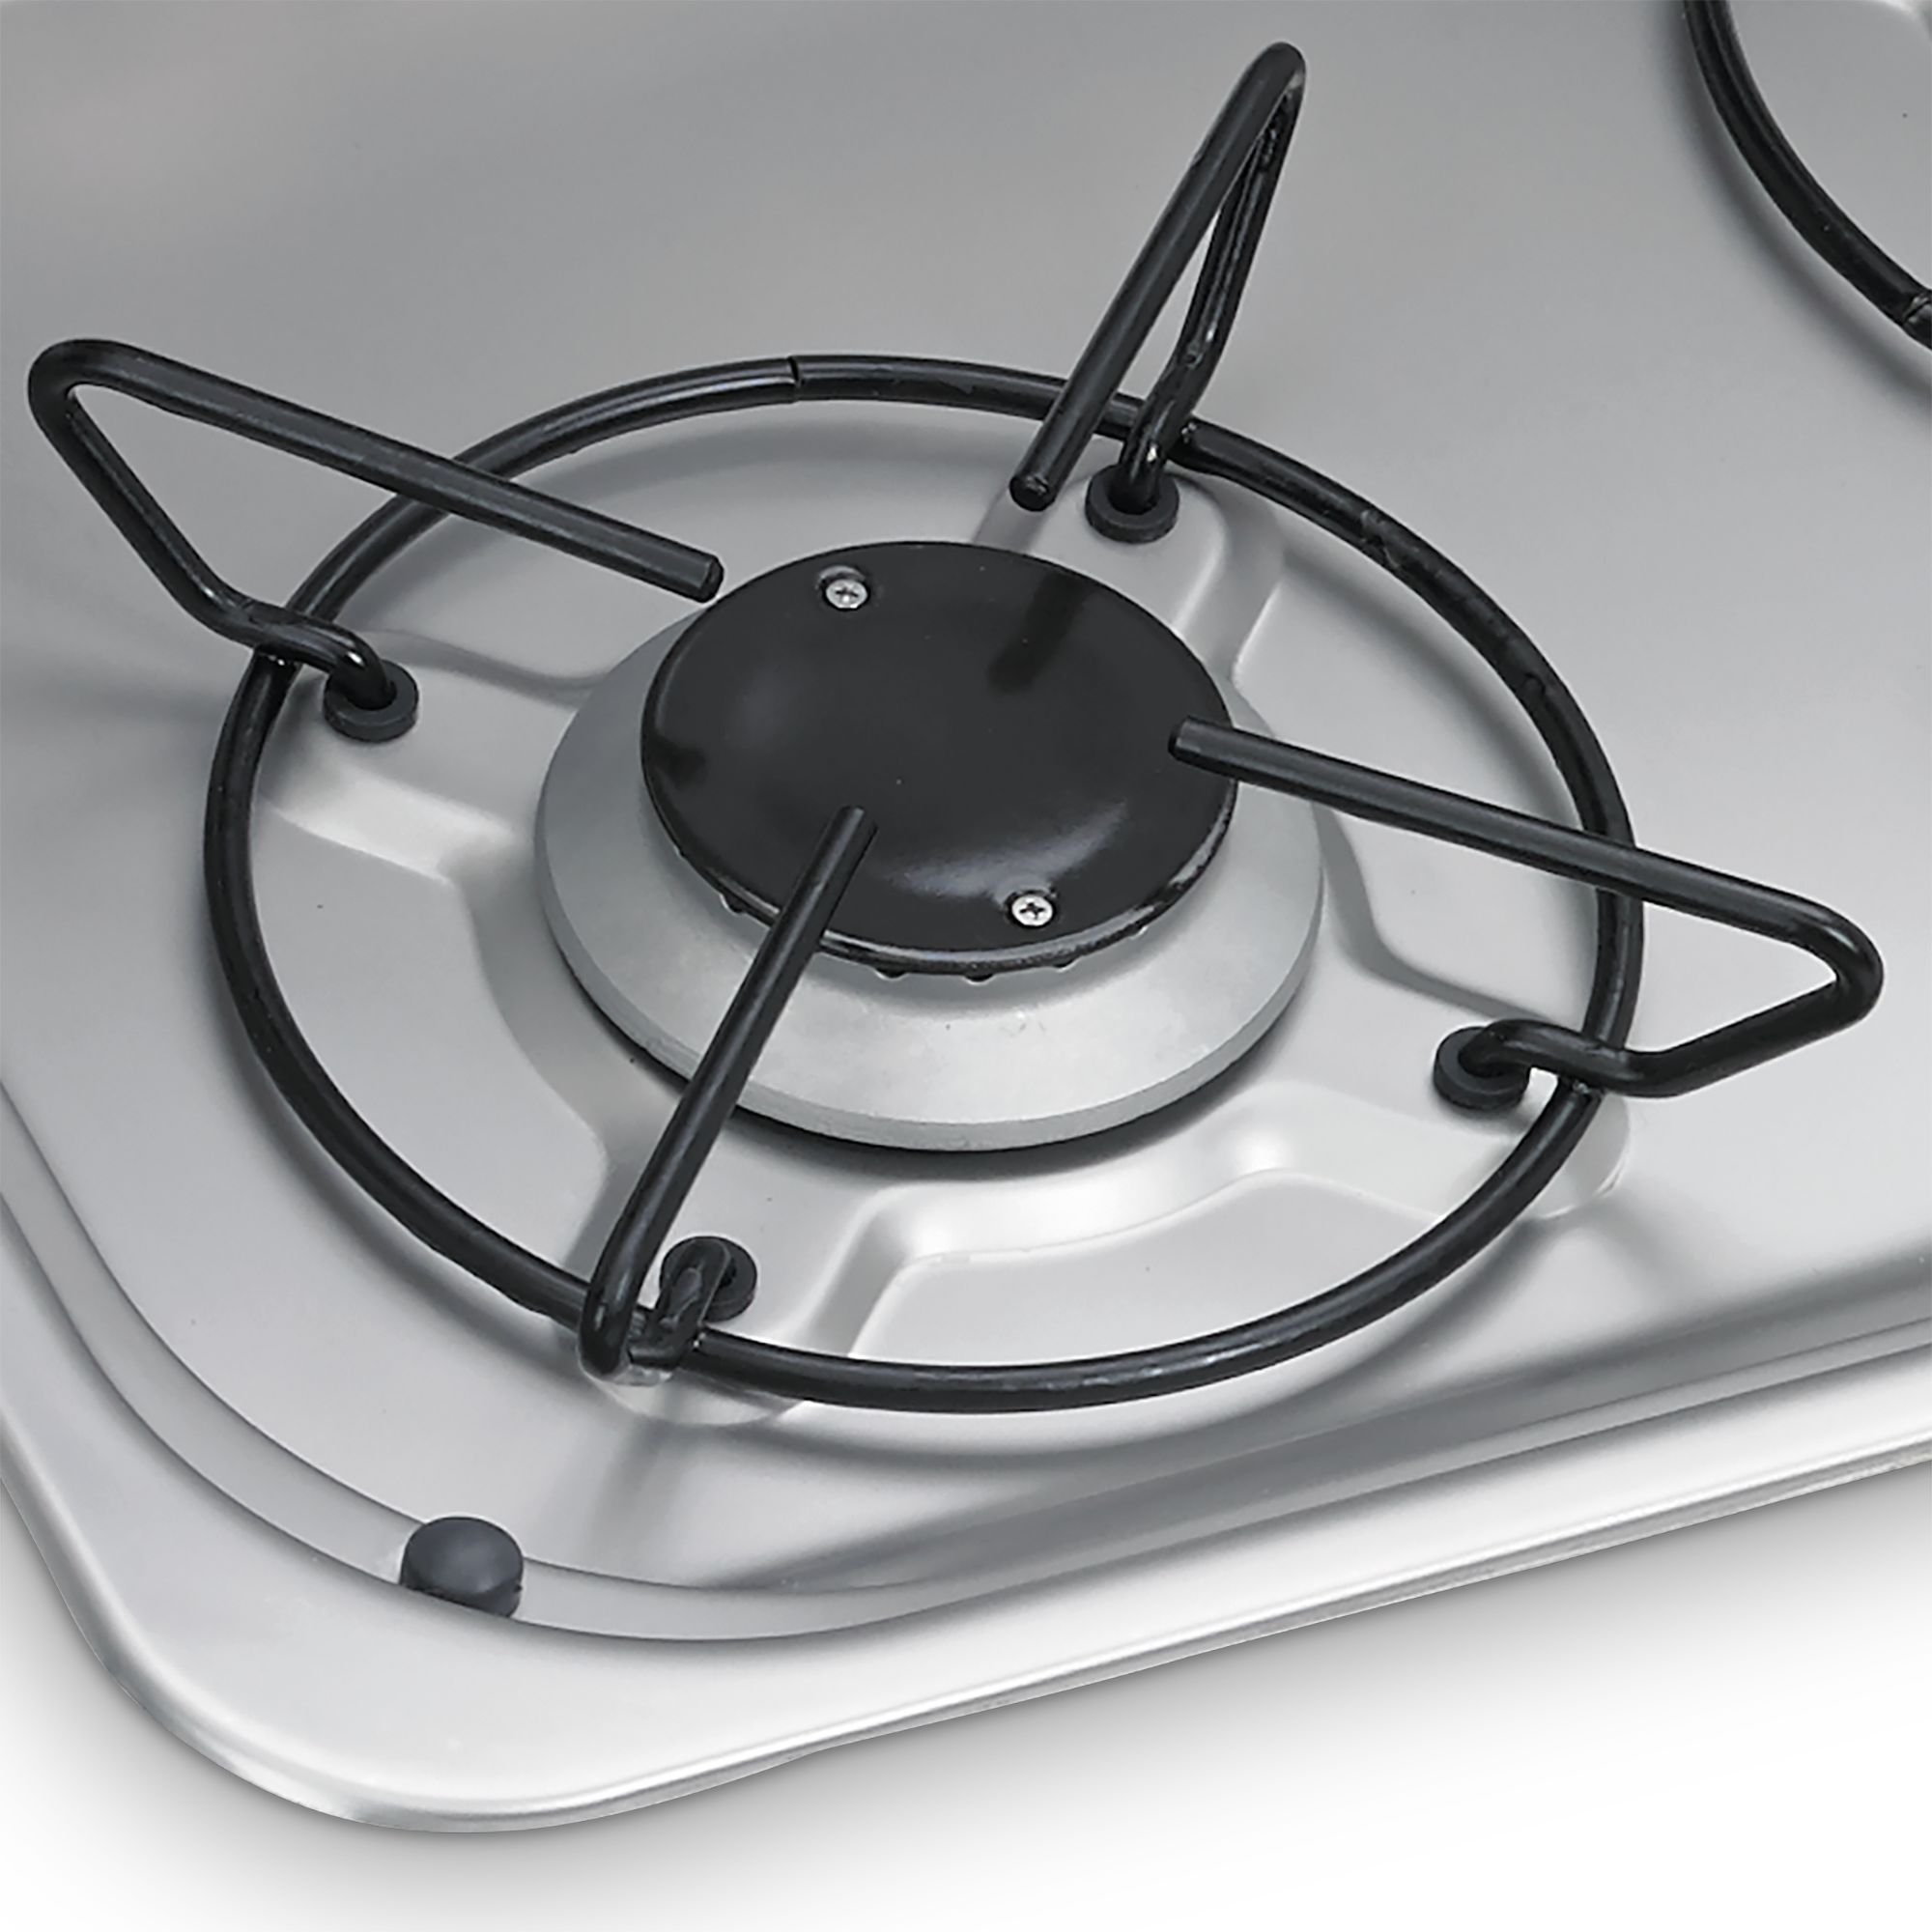 Dometic HBG 2335 (CE99-ZF) 2-burner gas hob, 460 x 335 mm, with glass lid